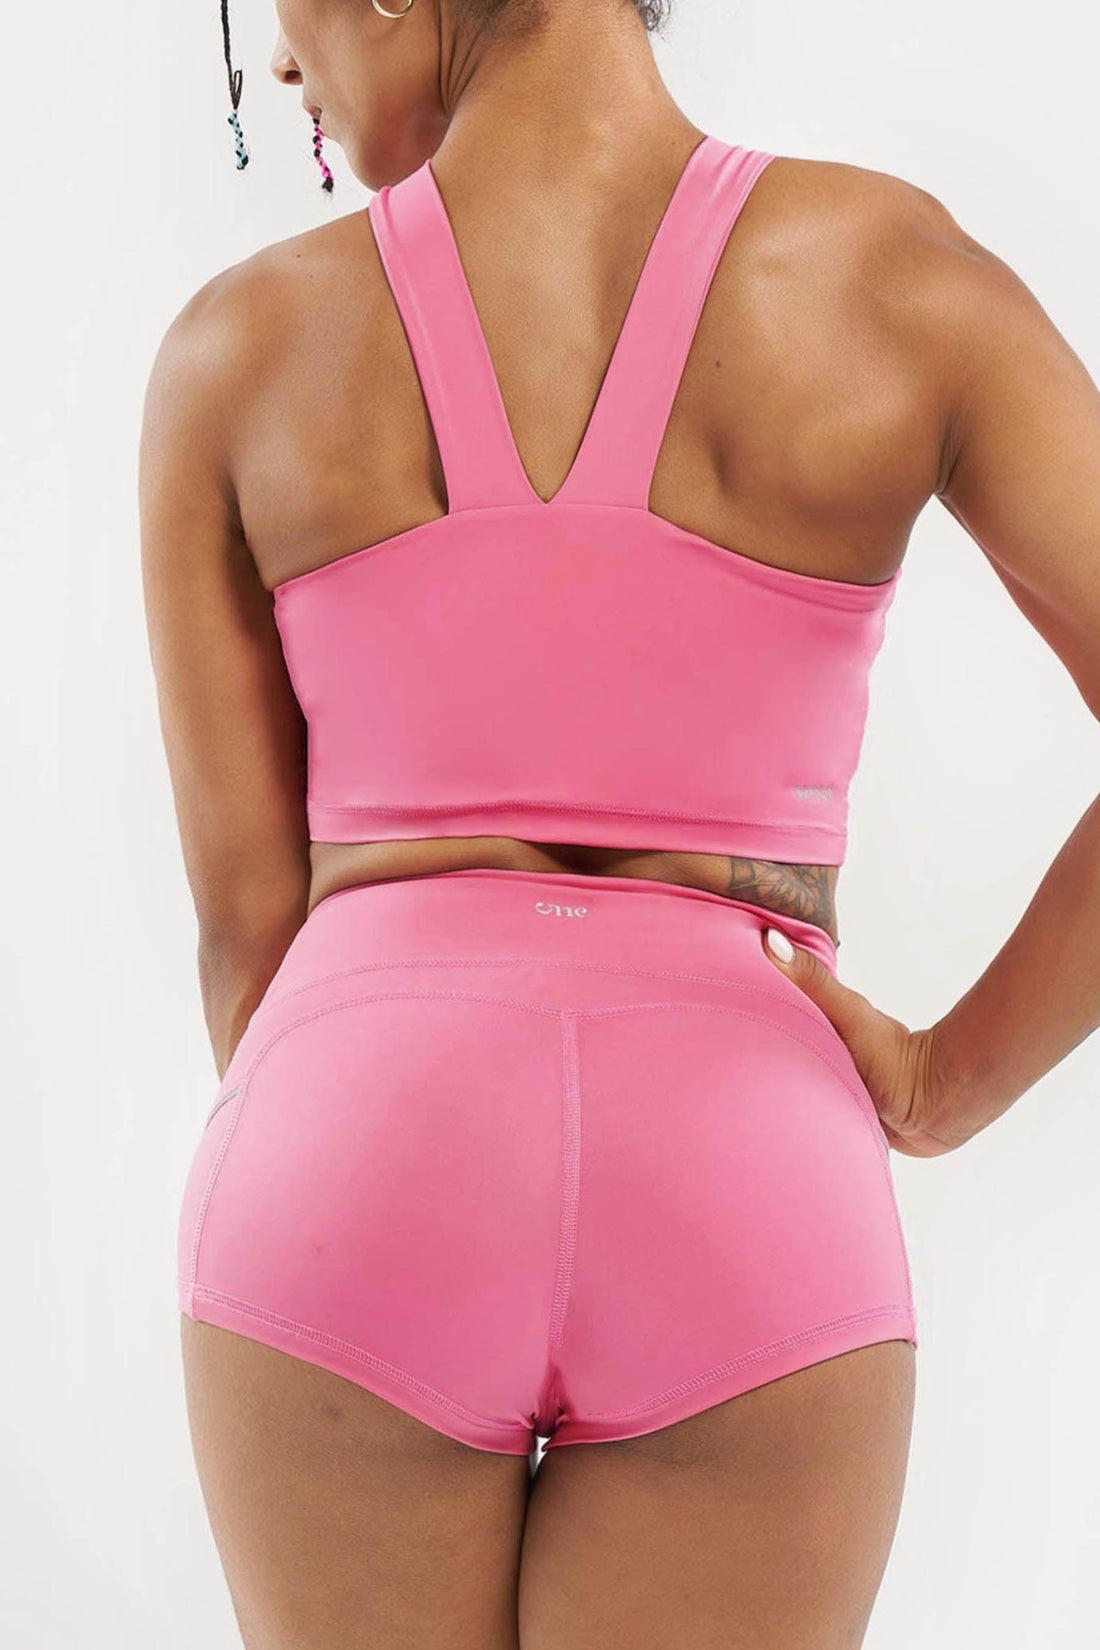 Sugar Cross Front Detail With Seamless In Back Crop Top